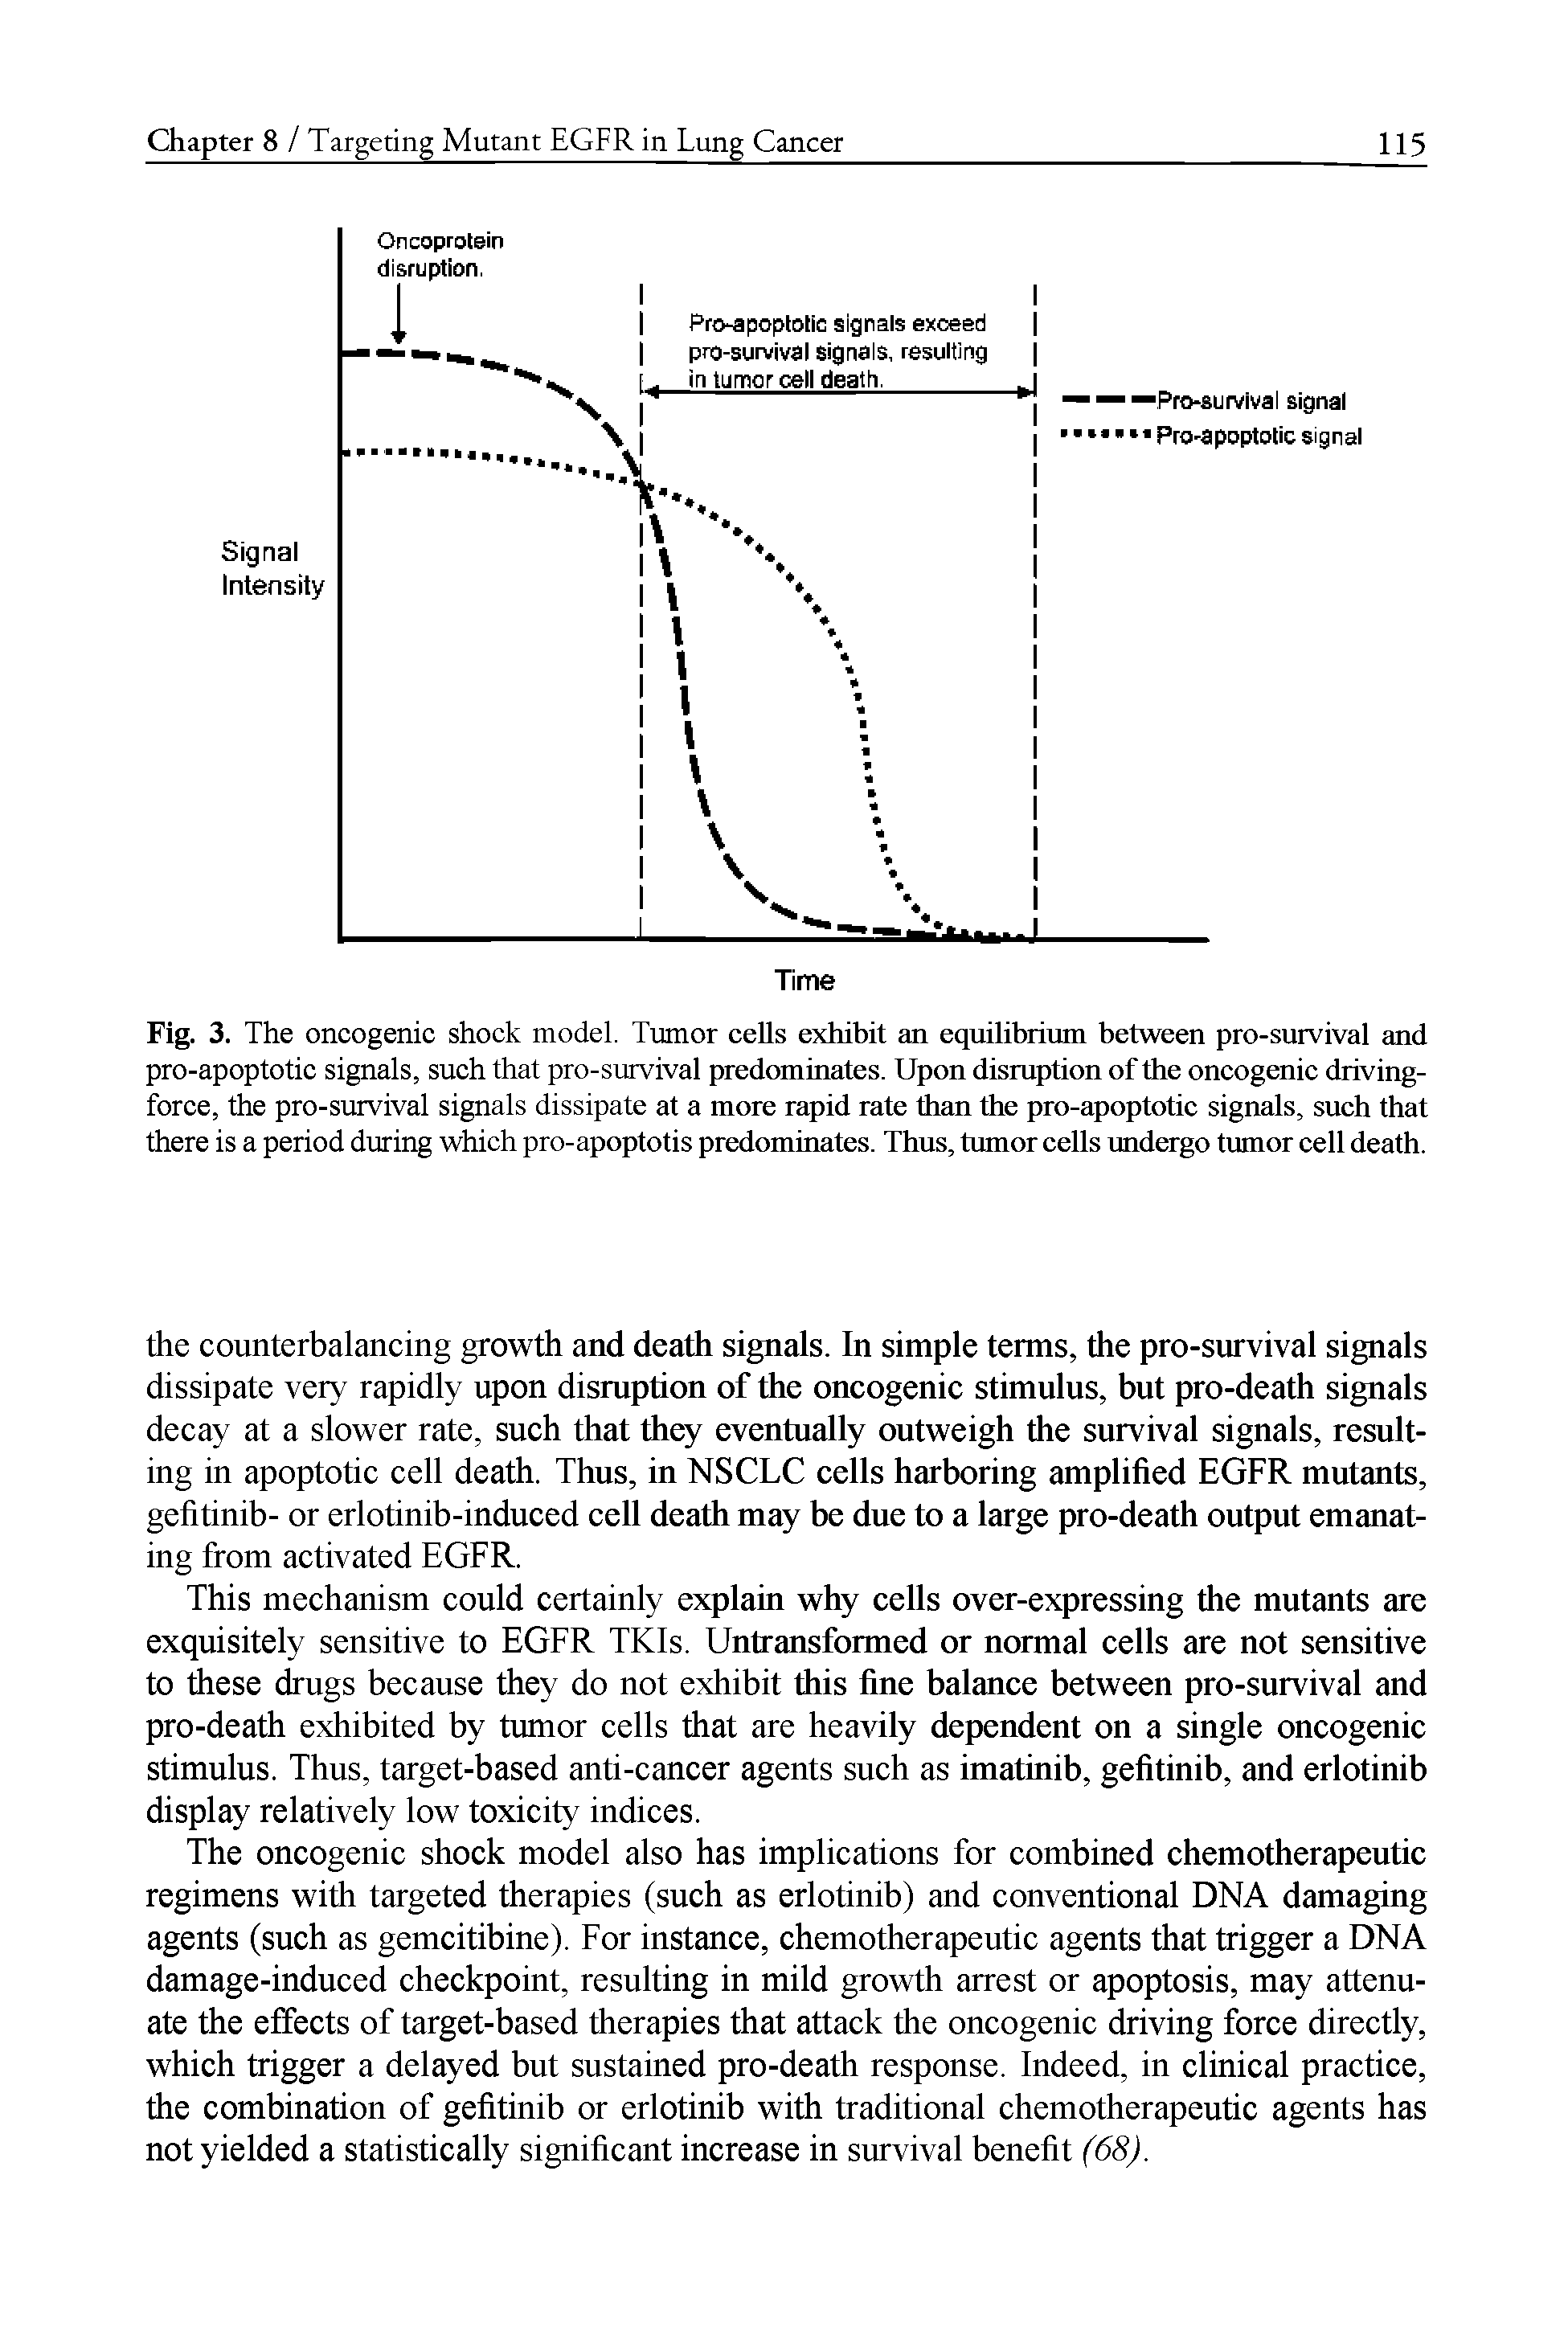 Fig. 3. The oncogenic shock model. Tumor cells exhibit an equilibrium between pro-survival and pro-apoptotic signals, such that pro-survival predominates. Upon disruption of the oncogenic driving-force, the pro-survival signals dissipate at a more rapid rate than the pro-apoptotic signals, such that there is a period during which pro-apoptotis predominates. Thus, tumor cells undergo tumor cell death.